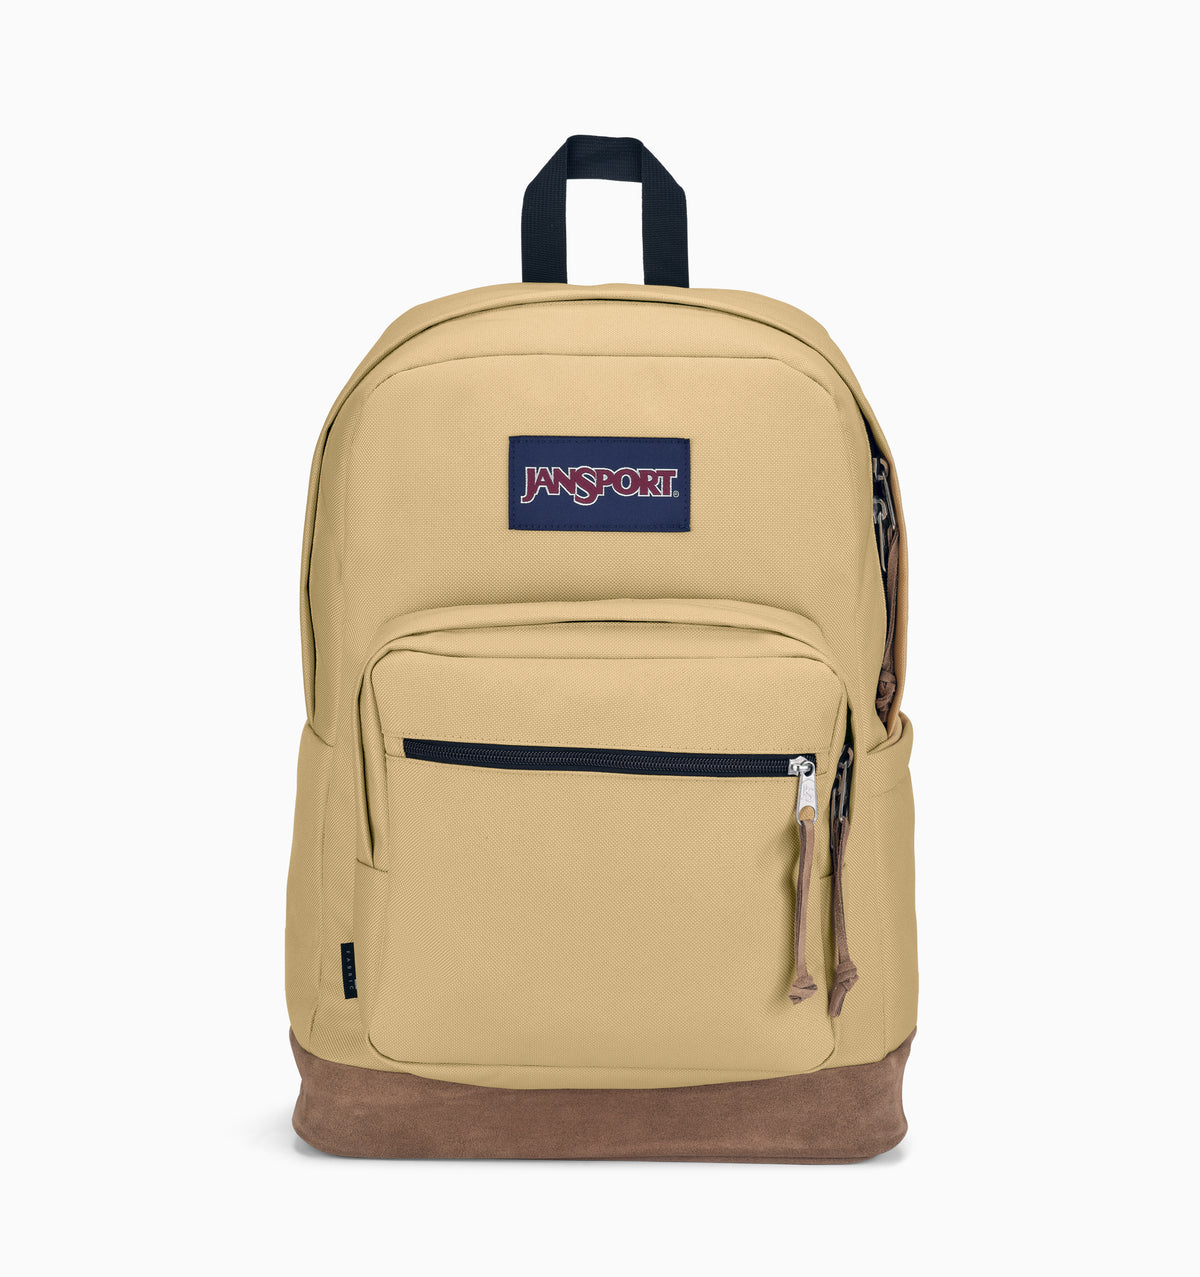 JanSport 16" Right Pack Laptop Backpack 31L - Curry